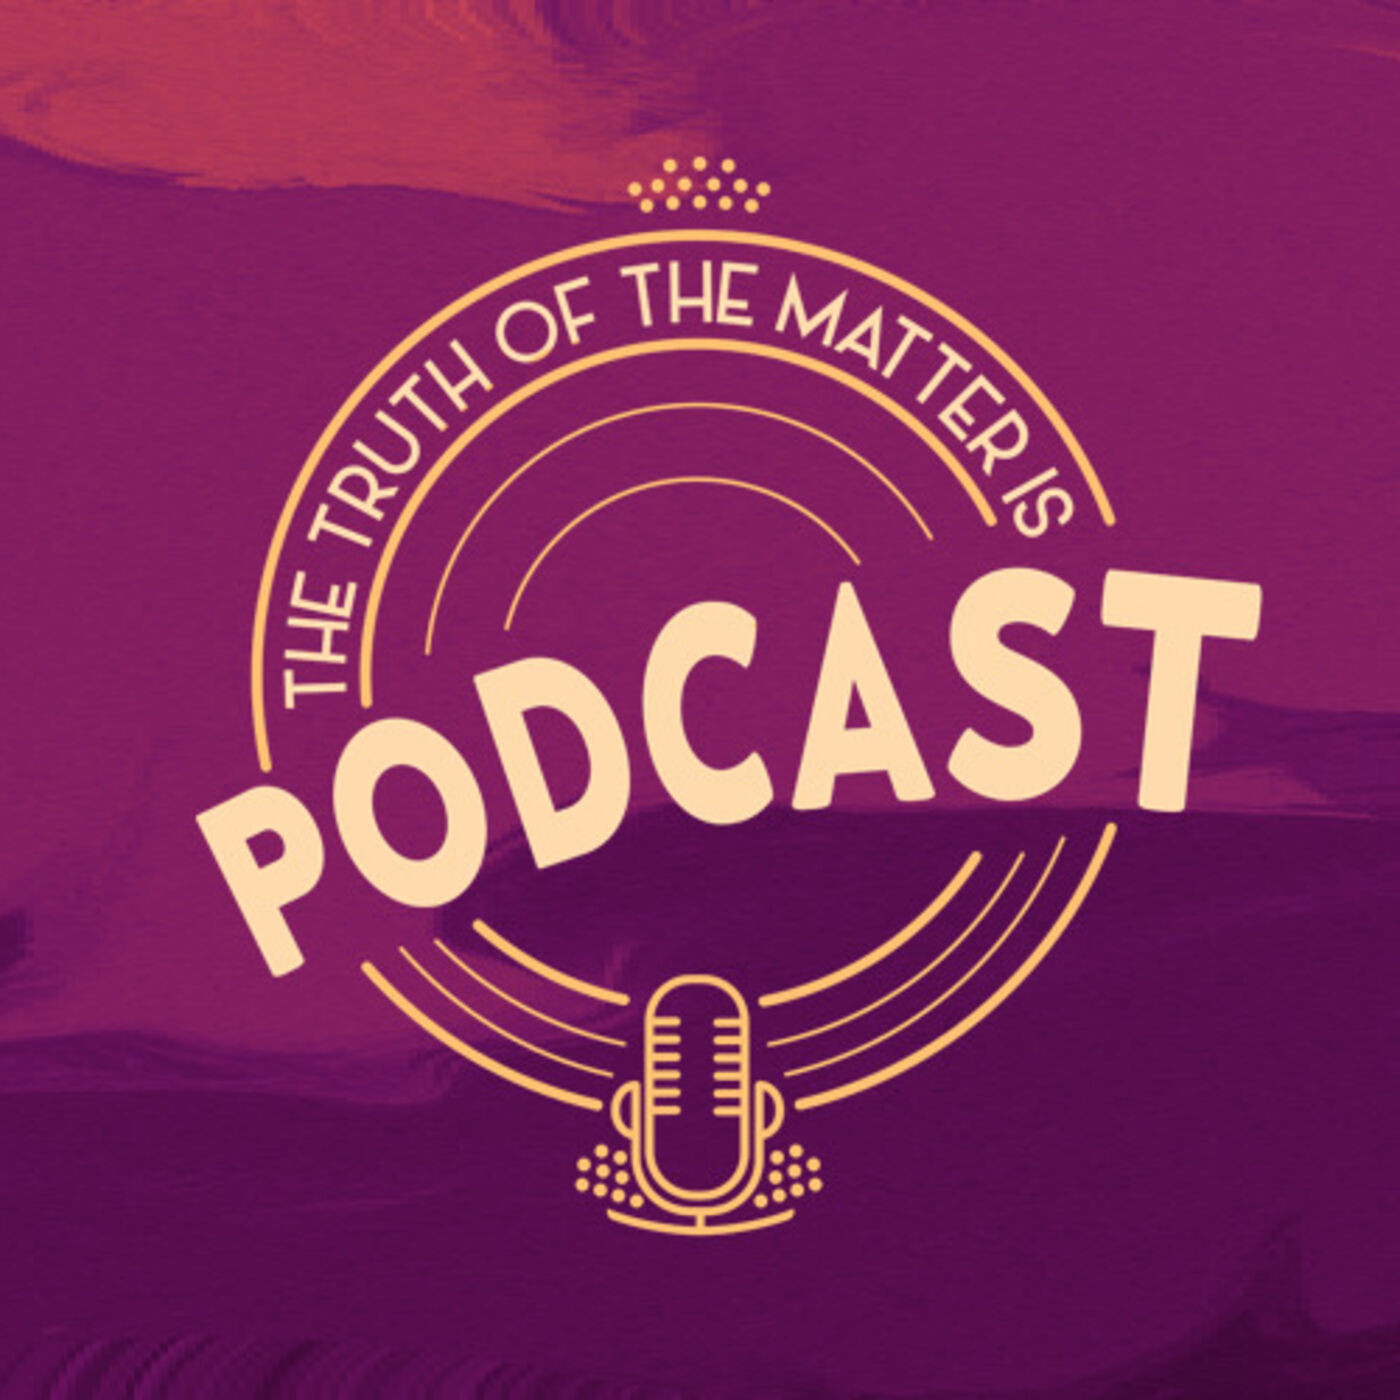 The Truth Of The Matter is - Episode: 138 Can A Saved Person Be Associated/Acquainted With An Unsaved Person?